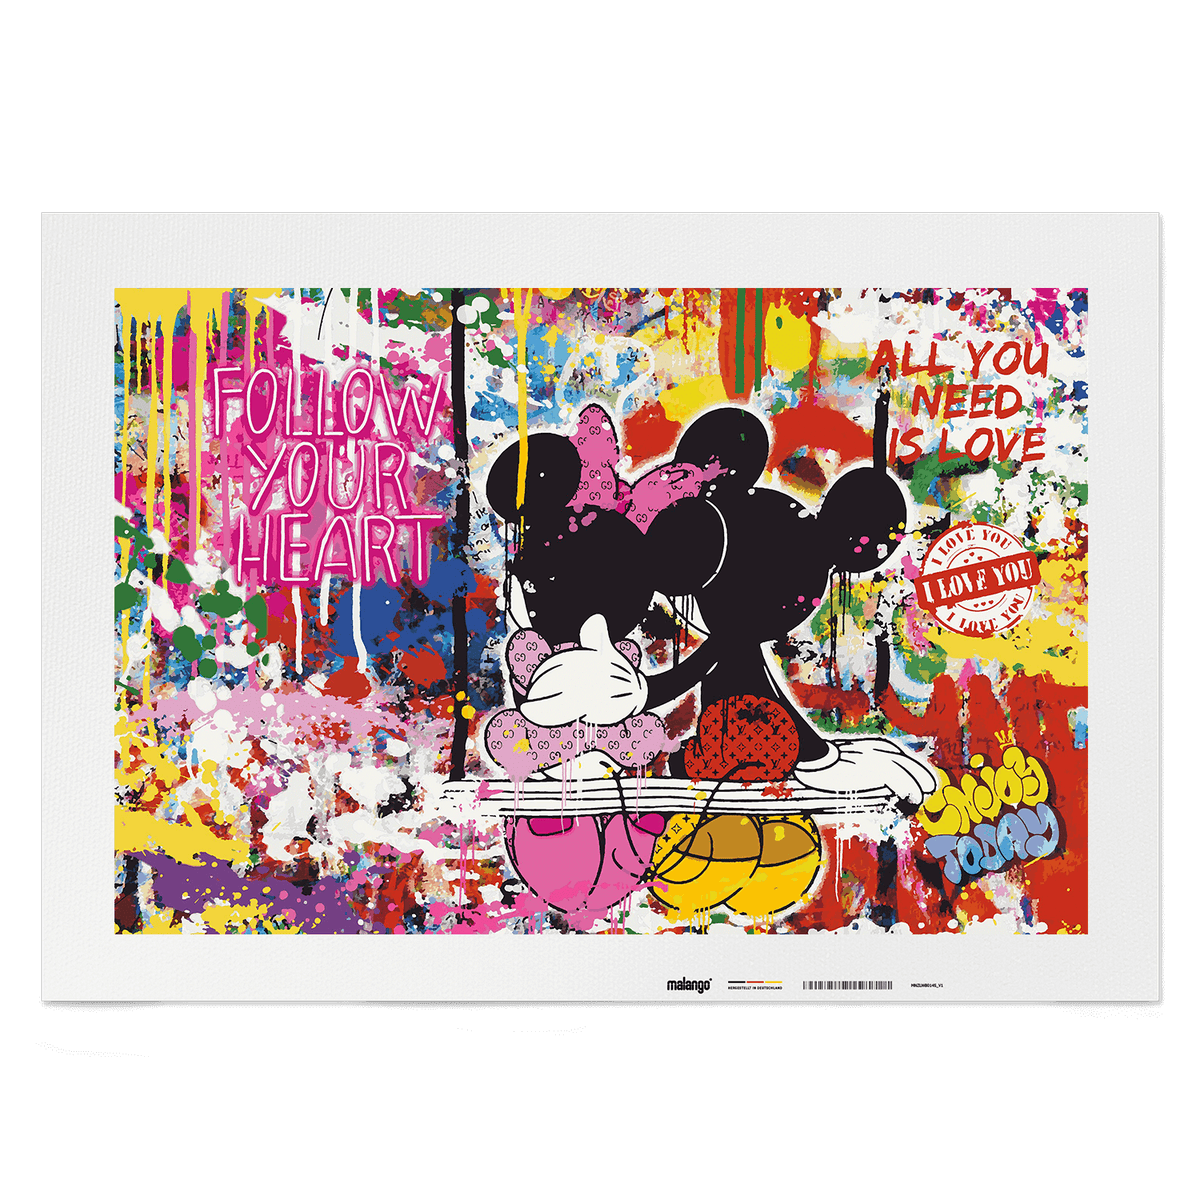 Malen nach Zahlen - MICKEY MEETS BANKSY - LOVE IS ALL WE NEED - LIMITED EDITION